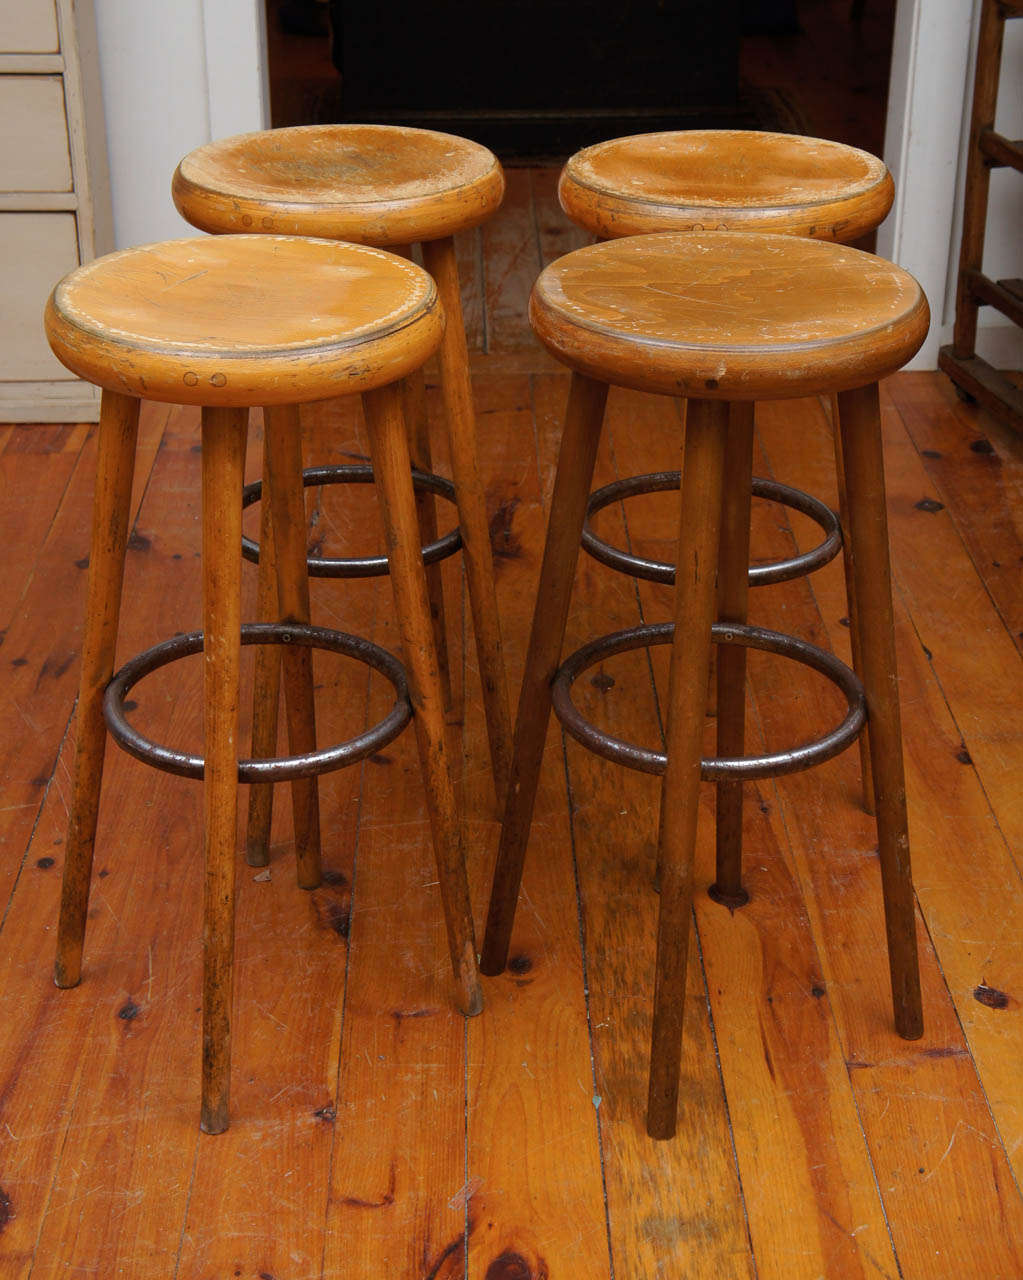 These stools came from a French bar in the south of France. Each is made of wood with a metal circular rim. This not only looks stunning, they hold the legs secure for a firm bar or counter stool. We buy these stools as tall as we can and they can